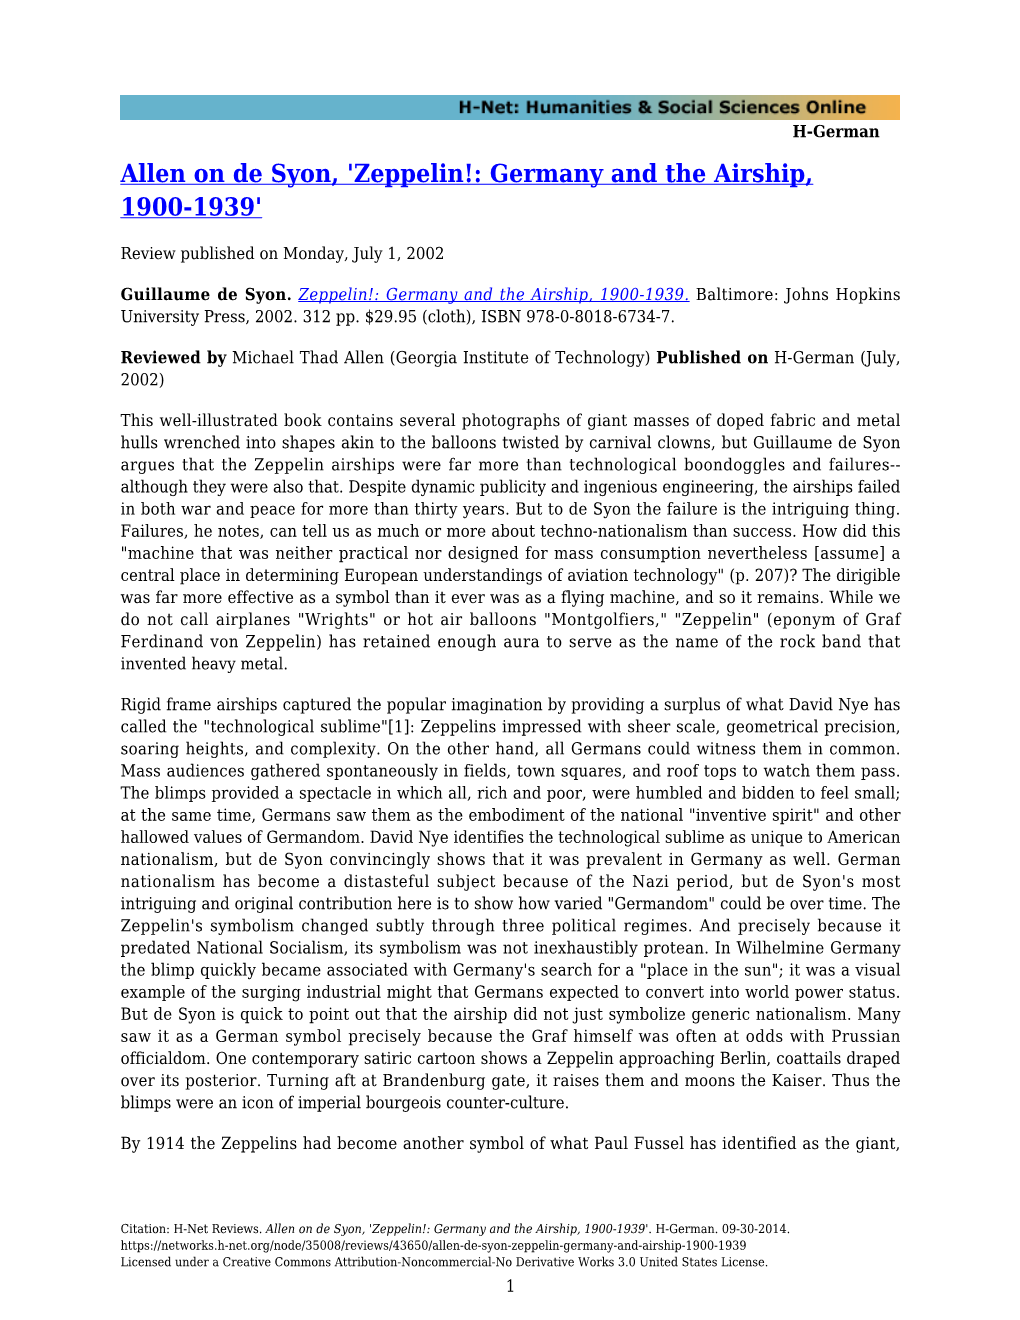 Zeppelin!: Germany and the Airship, 1900-1939'